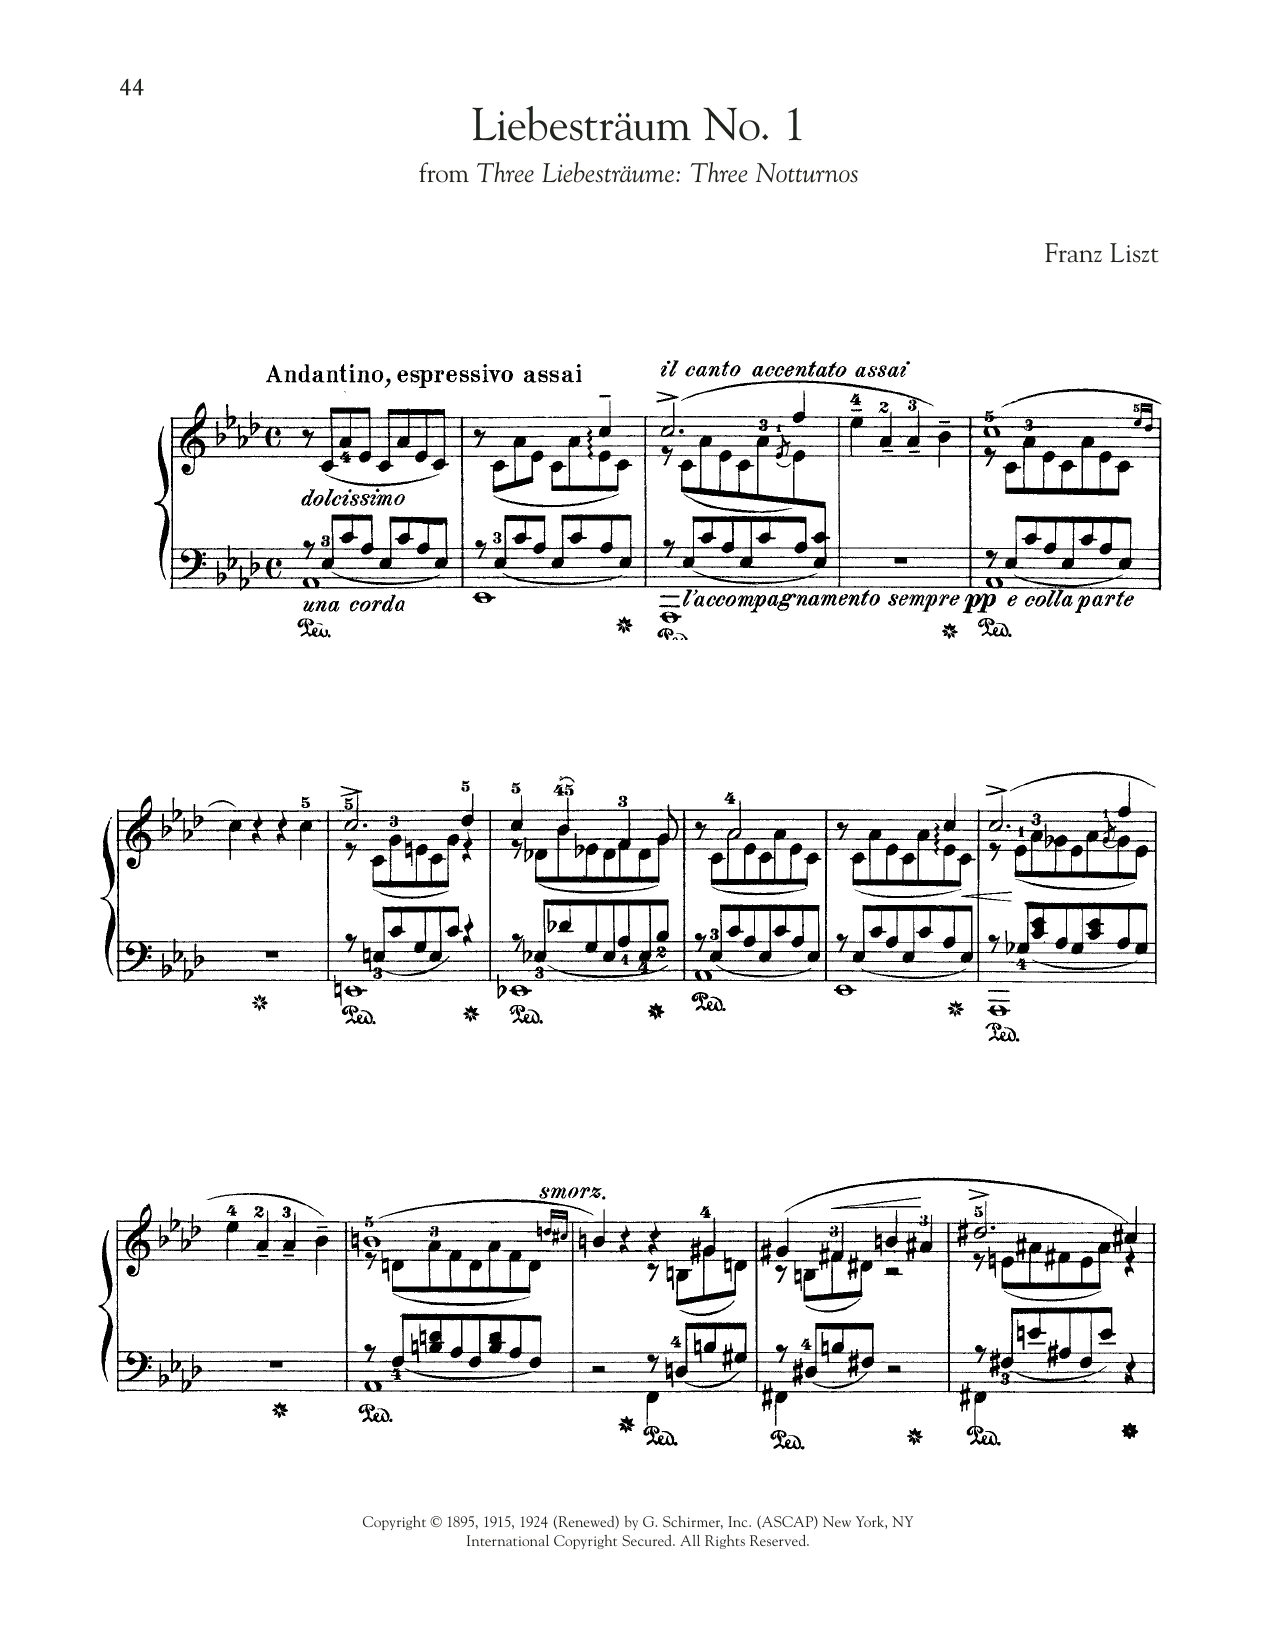 Franz Liszt Liebestraum No. 1 In A-Flat Major sheet music preview music notes and score for Piano Solo including 7 page(s)